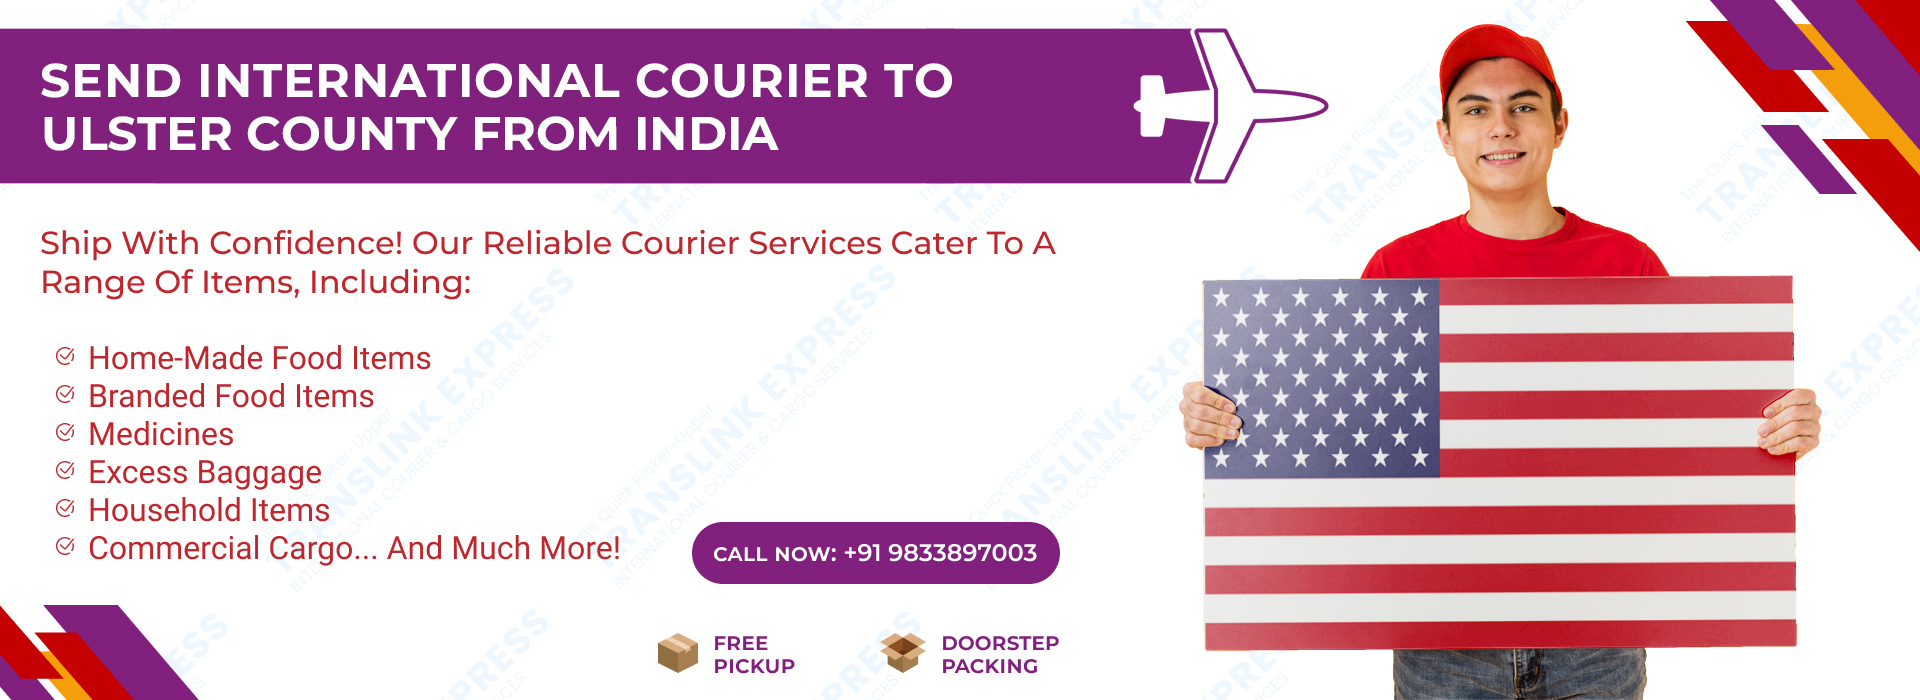 Courier to Ulster County From India